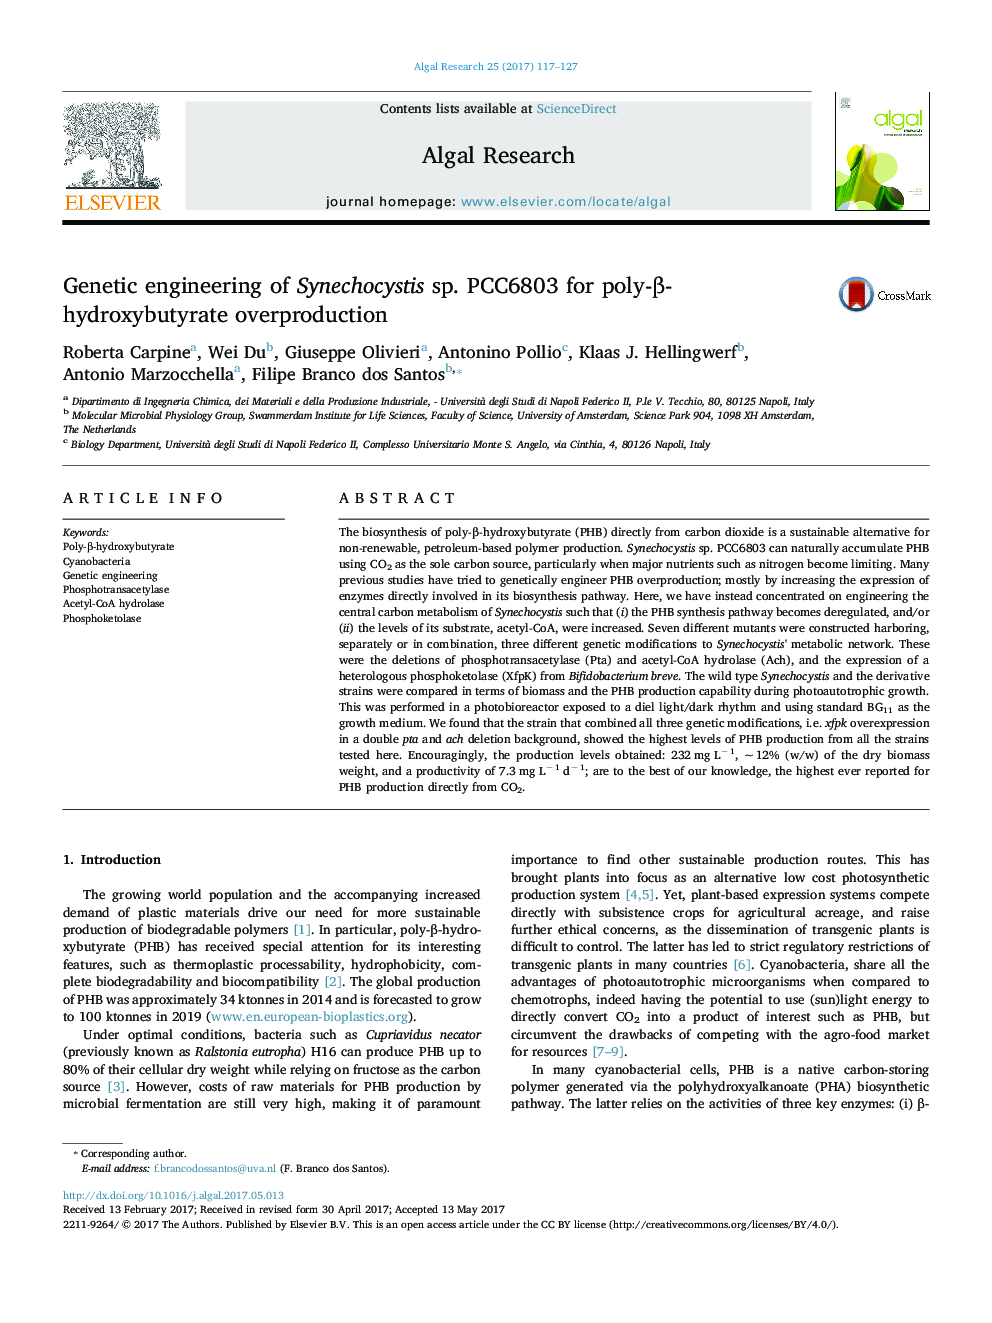 Genetic engineering of Synechocystis sp. PCC6803 for poly-Î²-hydroxybutyrate overproduction